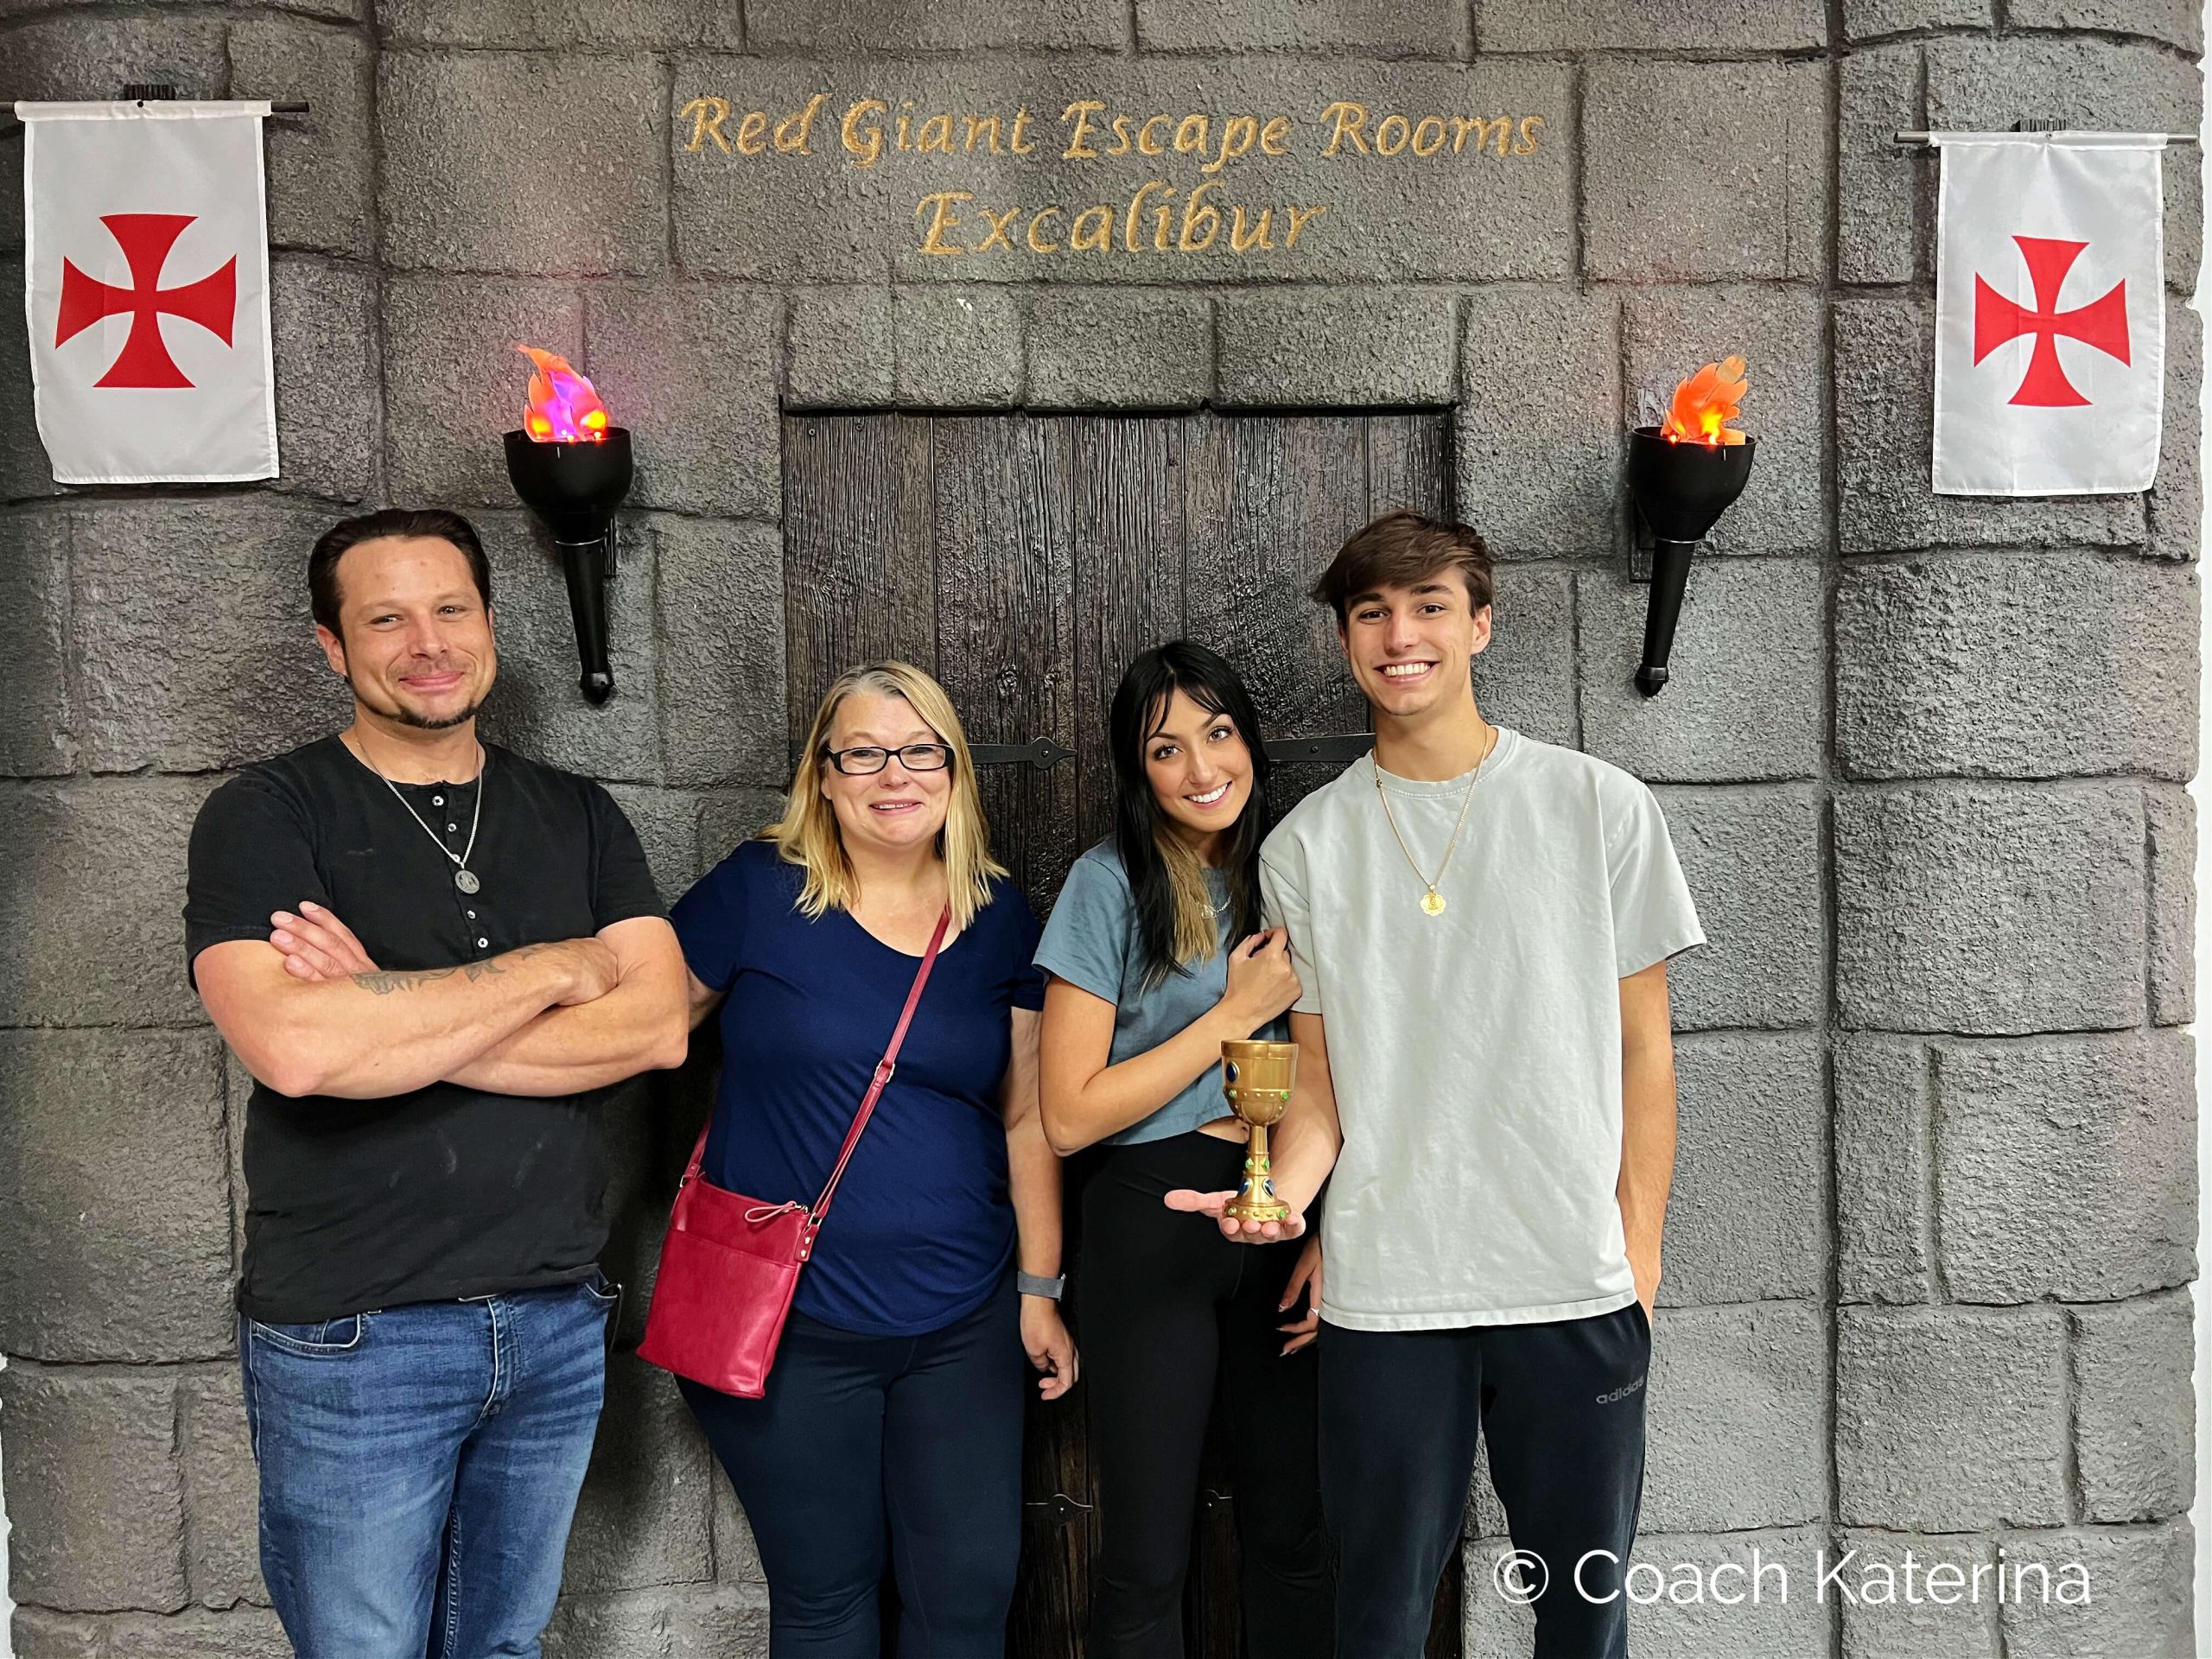 Katerina Gasset and Family at the Red Giant Escape Rooms in Orem Utah